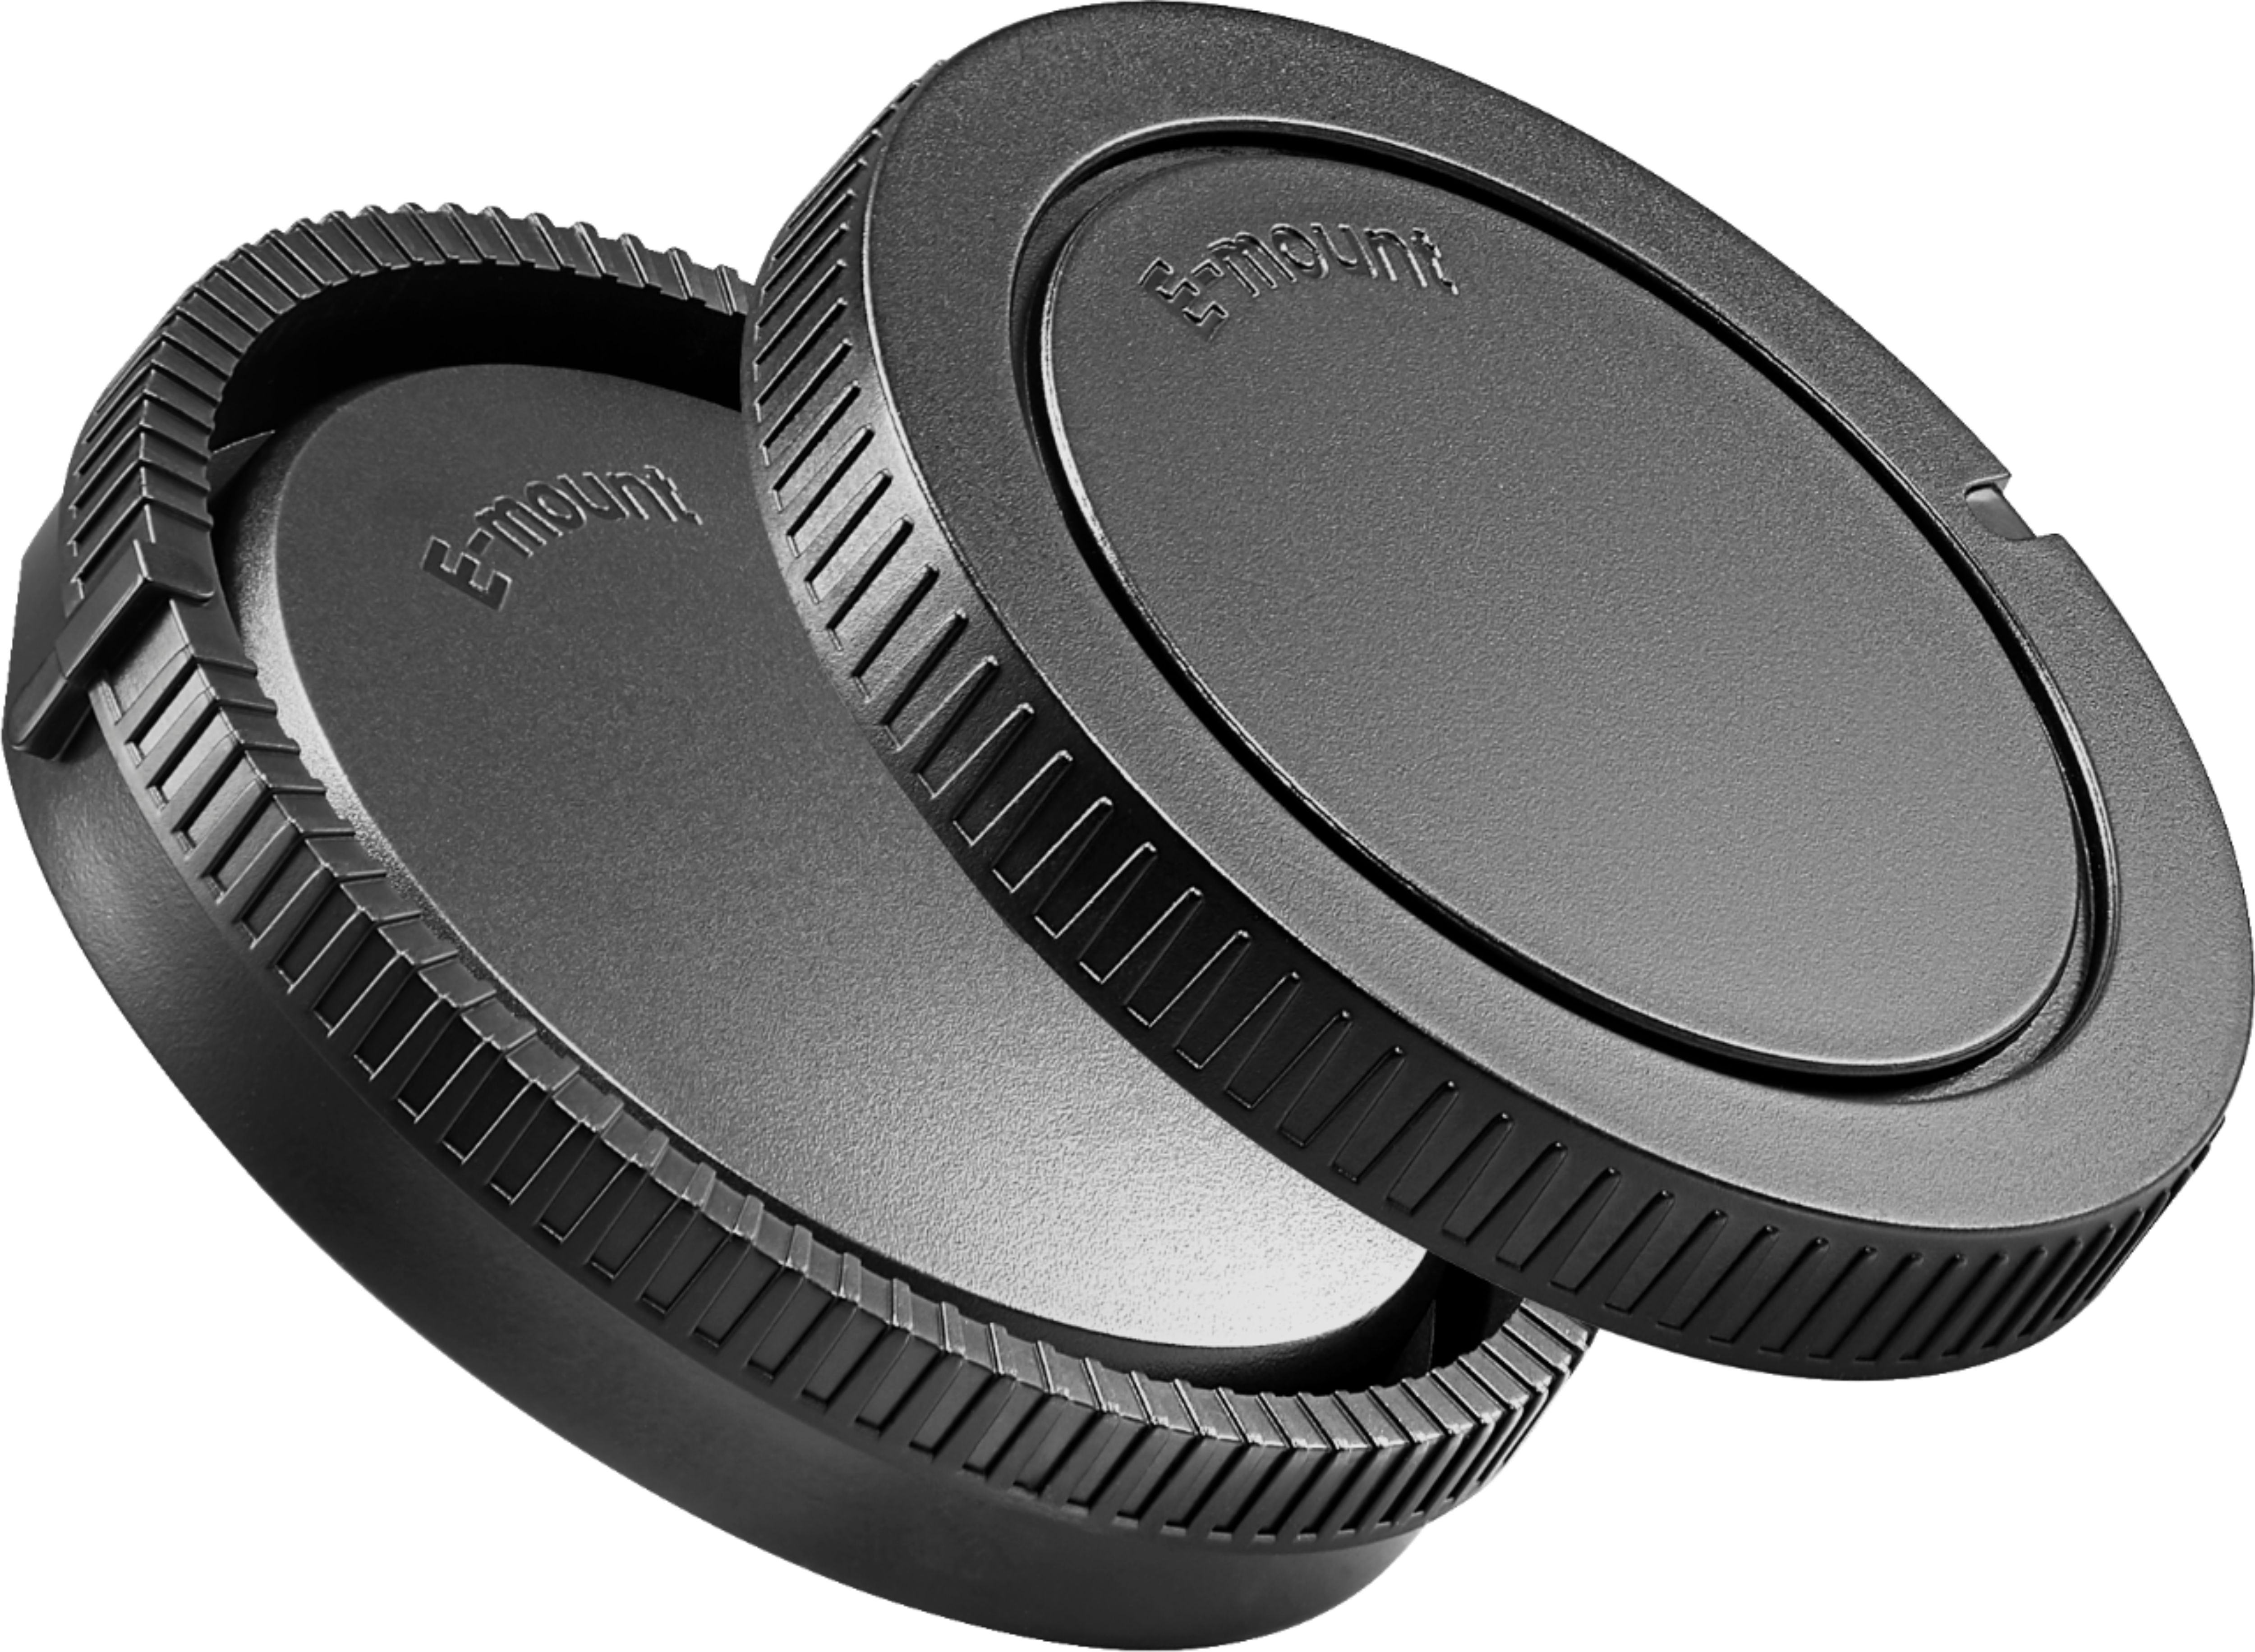 Angle View: Platinum™ - Body Cap and Rear Lens Cap for Sony - Black